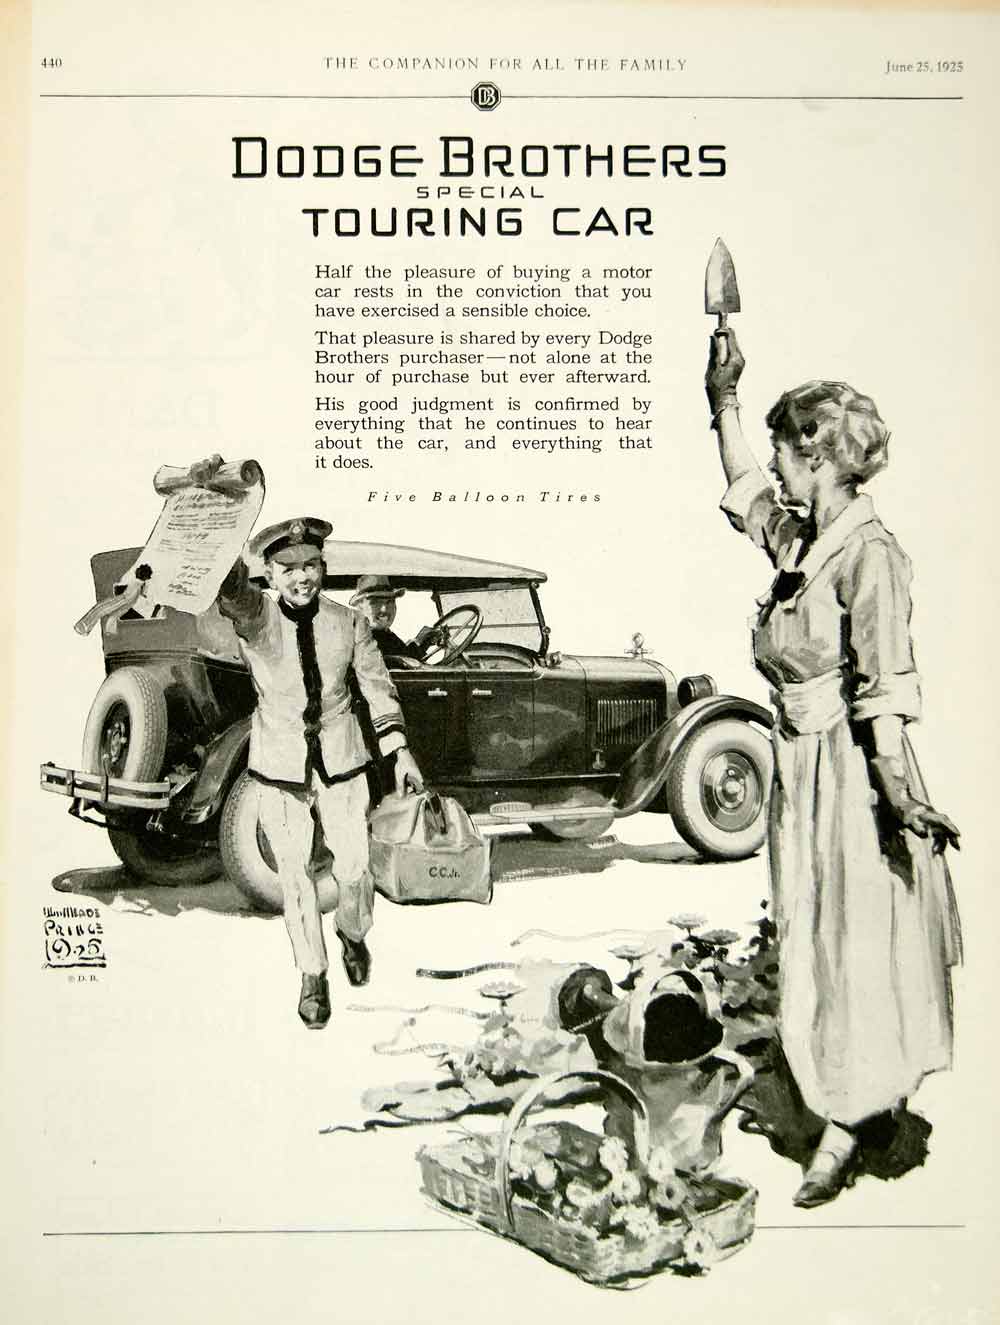 1925 Ad William Meade Prince Art Dodge Brothers Touring Car Automobile Gardening